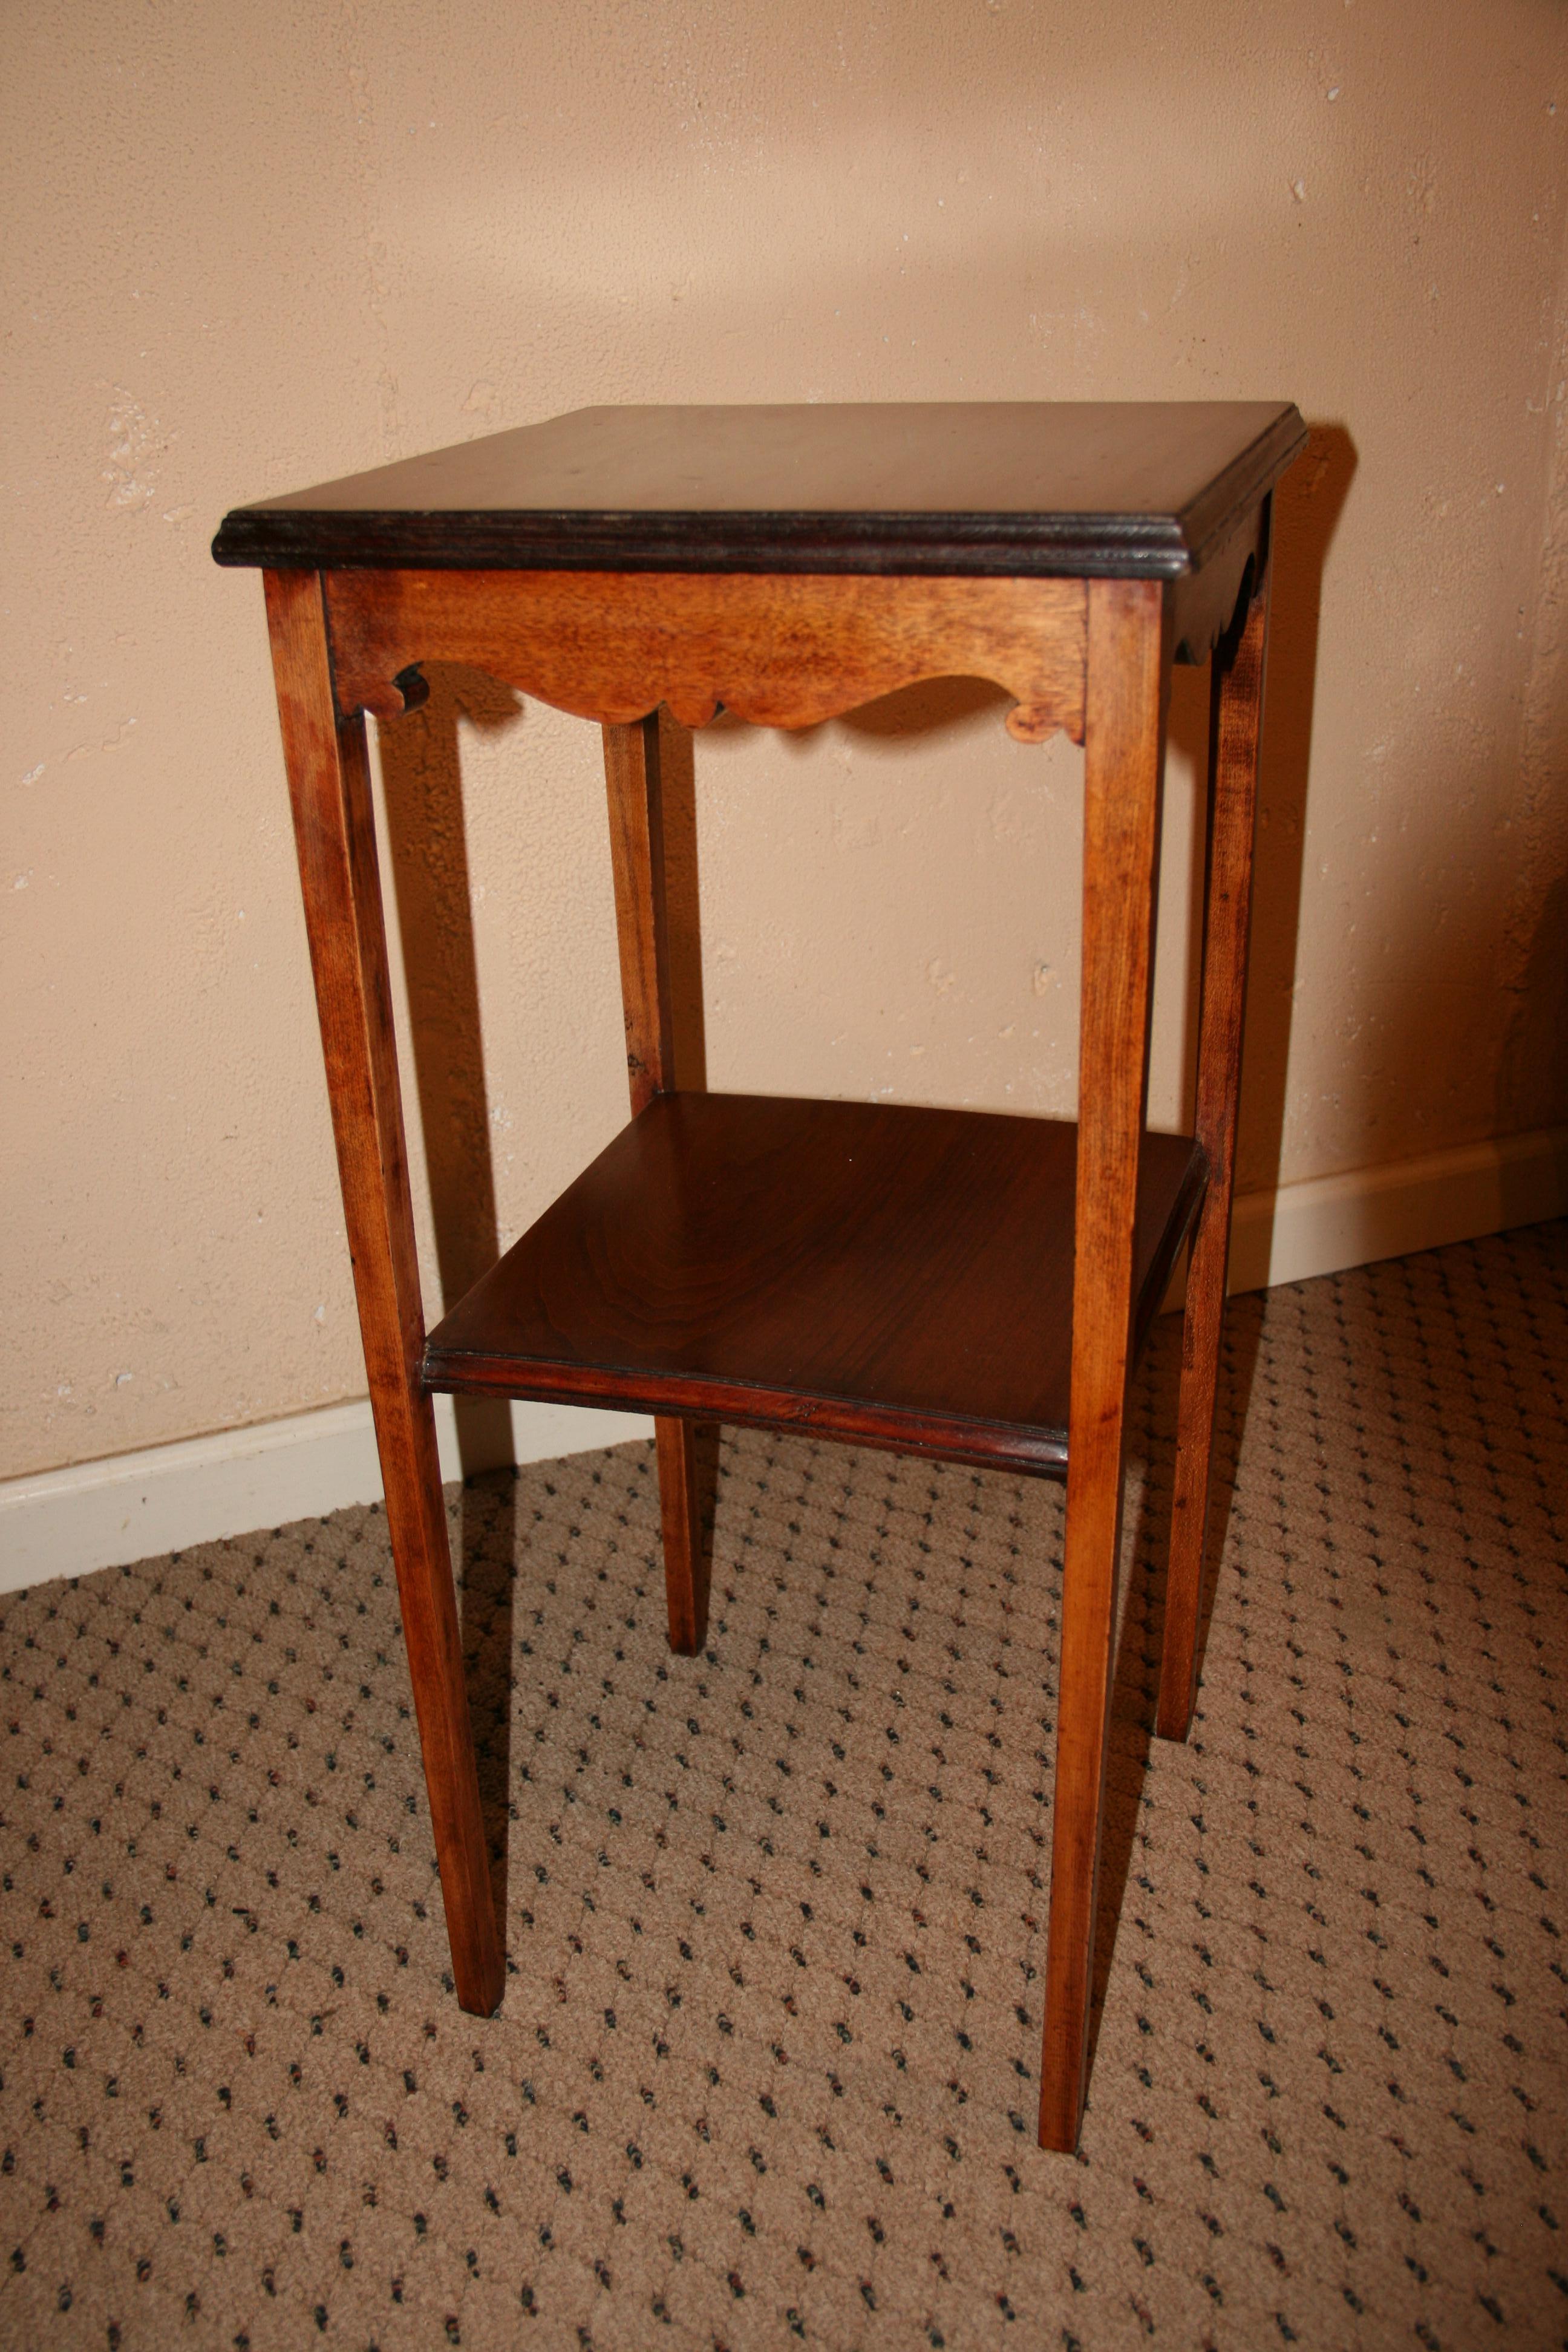 Early 20th Century English Walnut Two Level Scalloped  Spider Leg Table / Pedestal 1920's For Sale